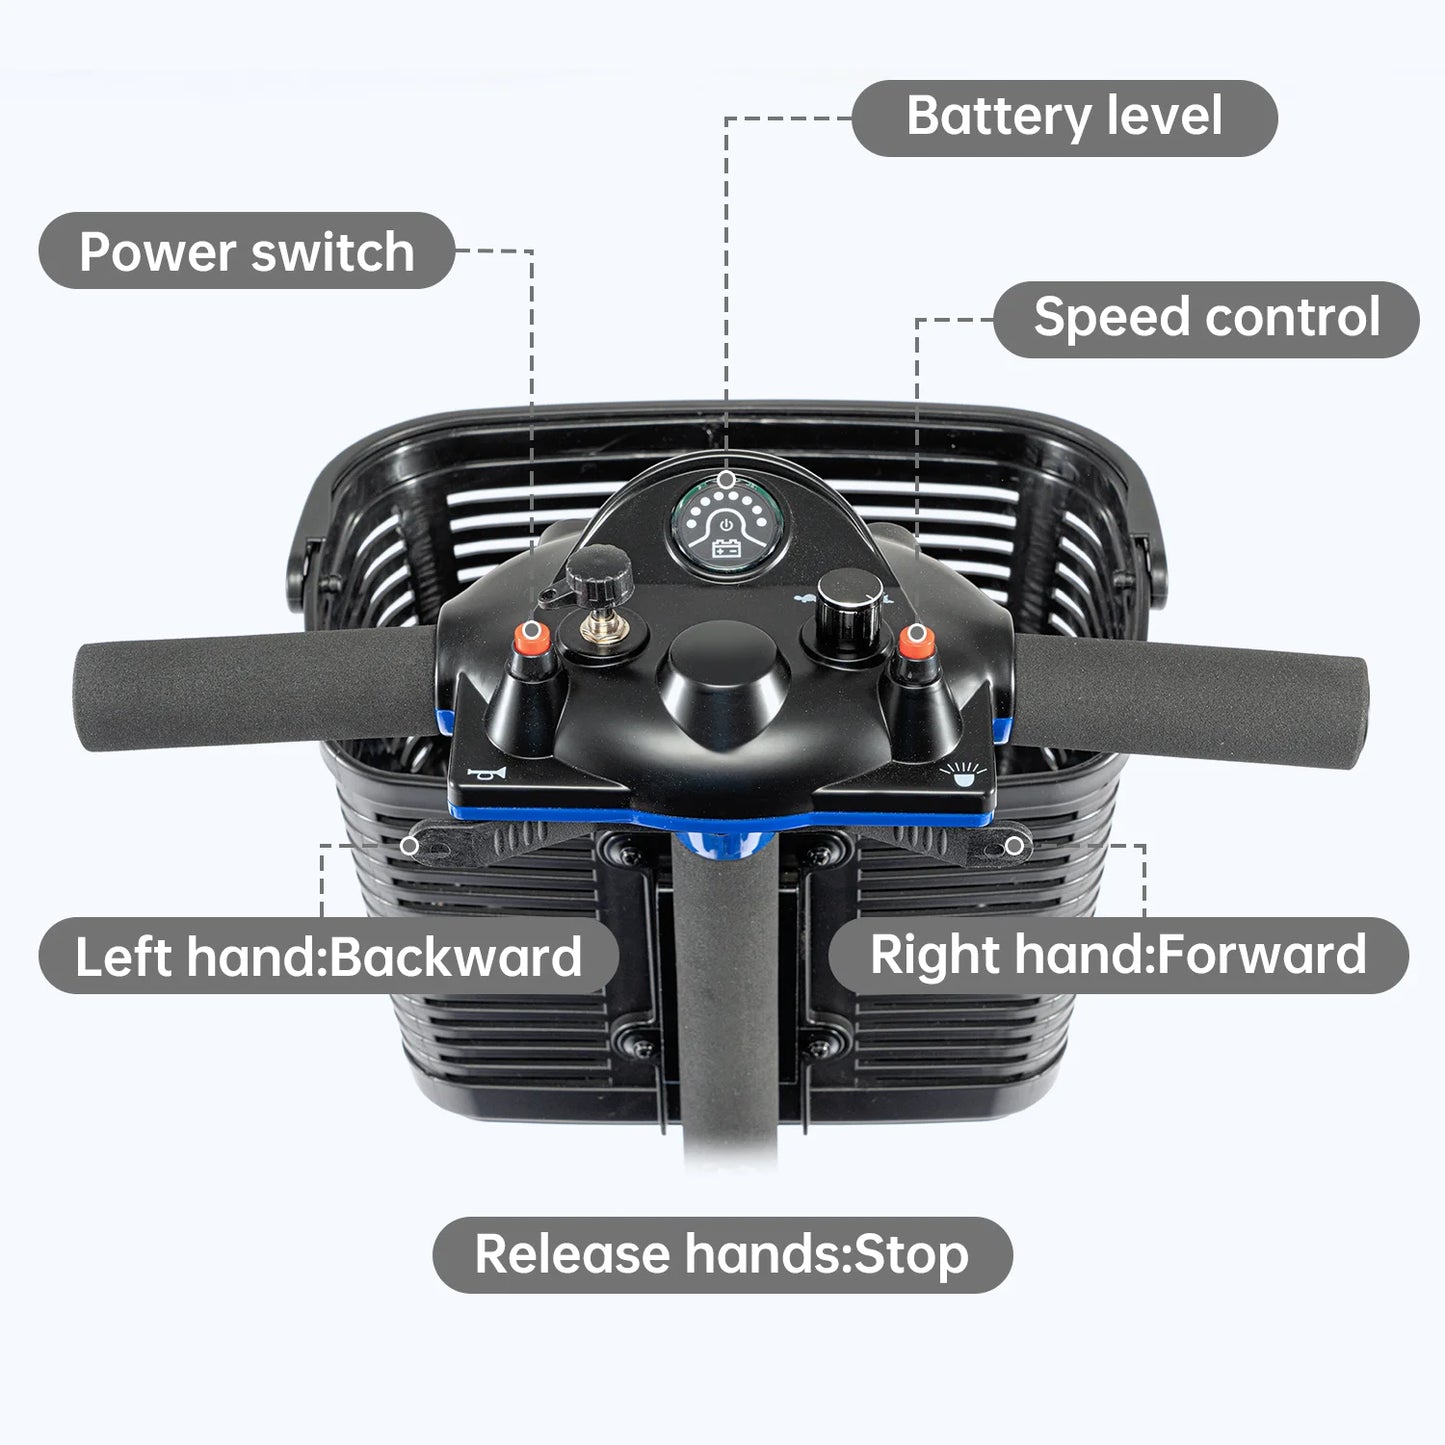 3 Wheel Foldable Electric Scooter